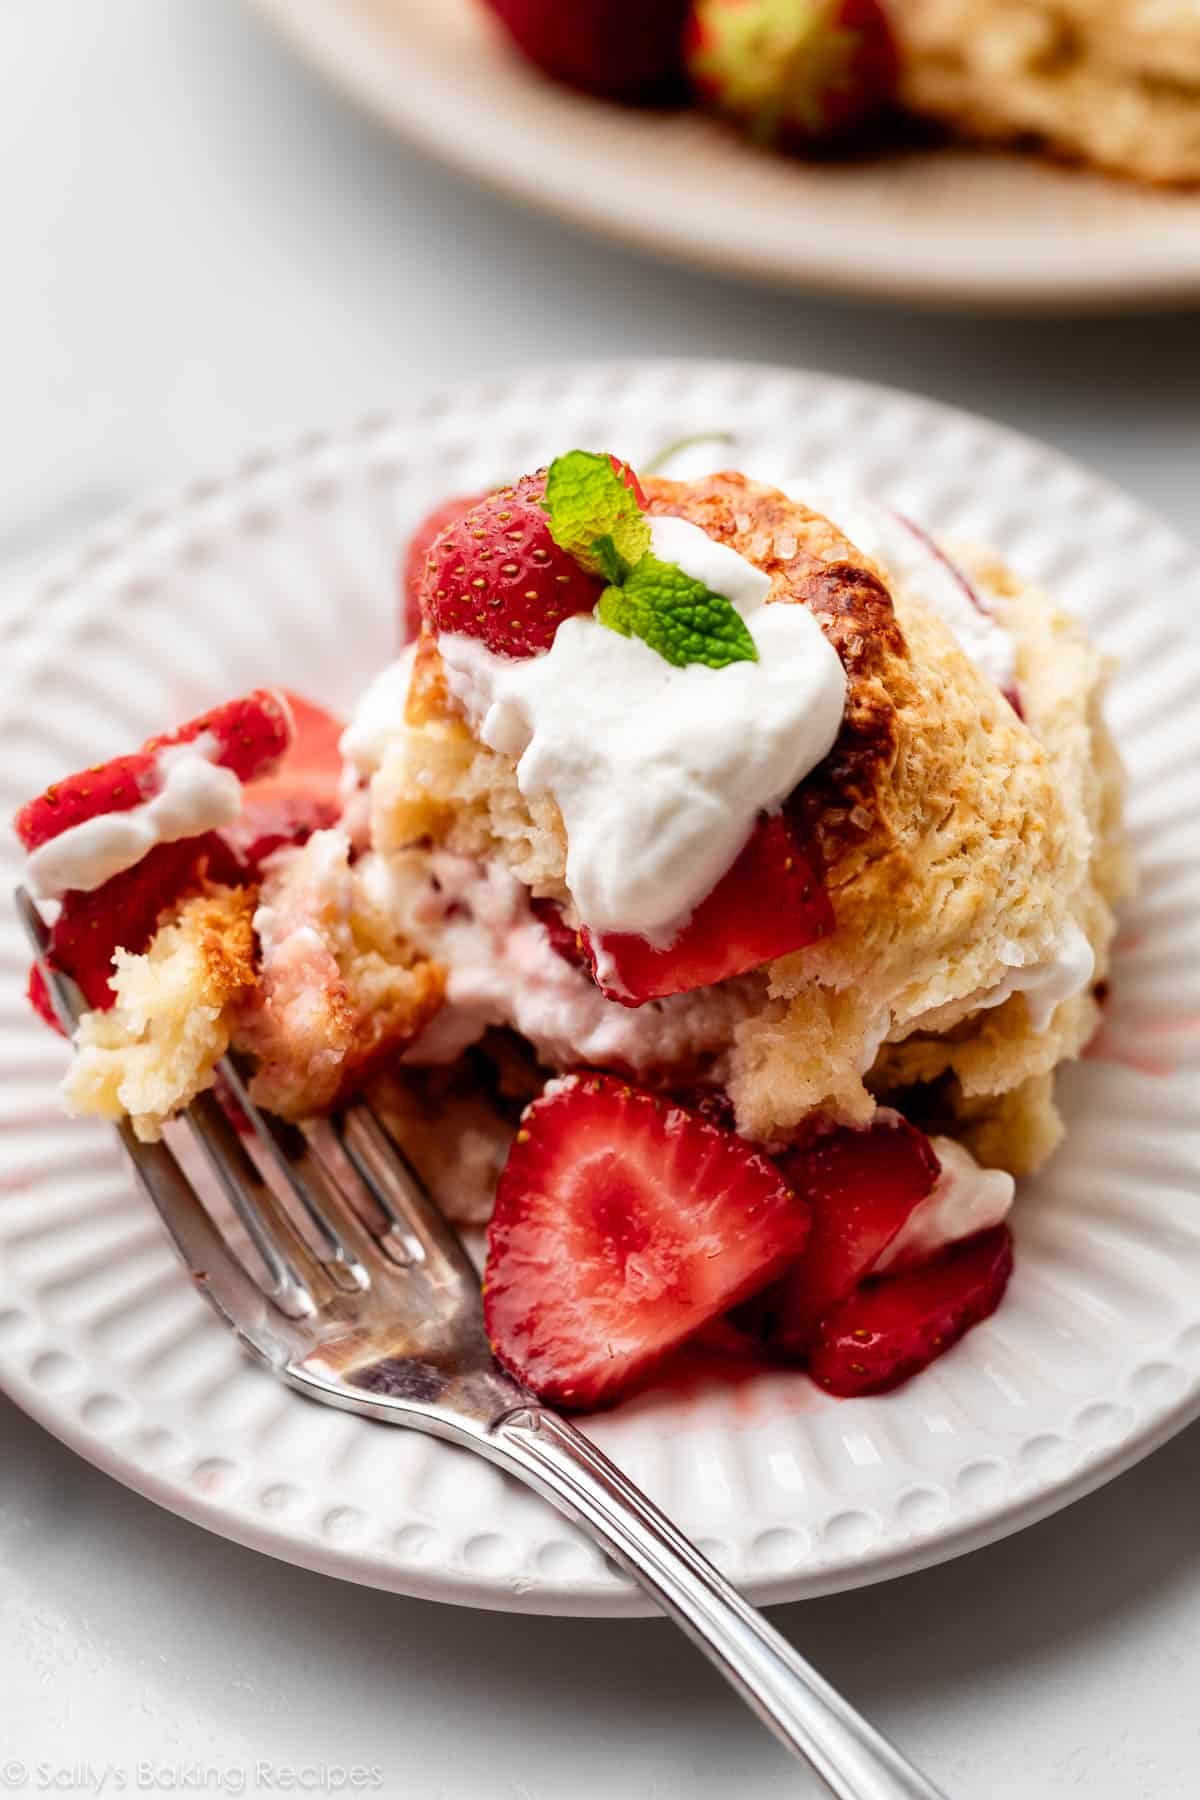 strawberry shortcake with homemade biscuits and whipped cream on white plate.